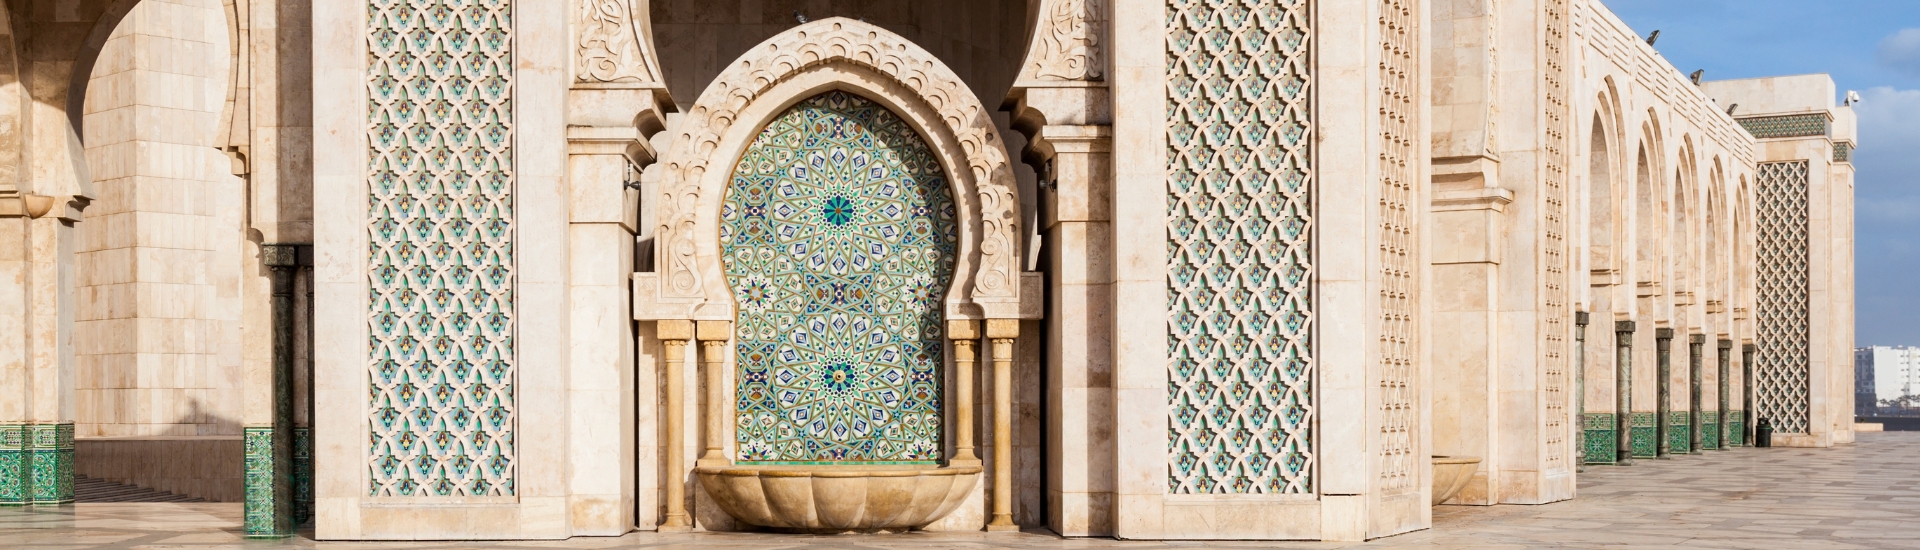 Mosaic and intricate design of Hassan II Mosque in Casablanca, Morocco